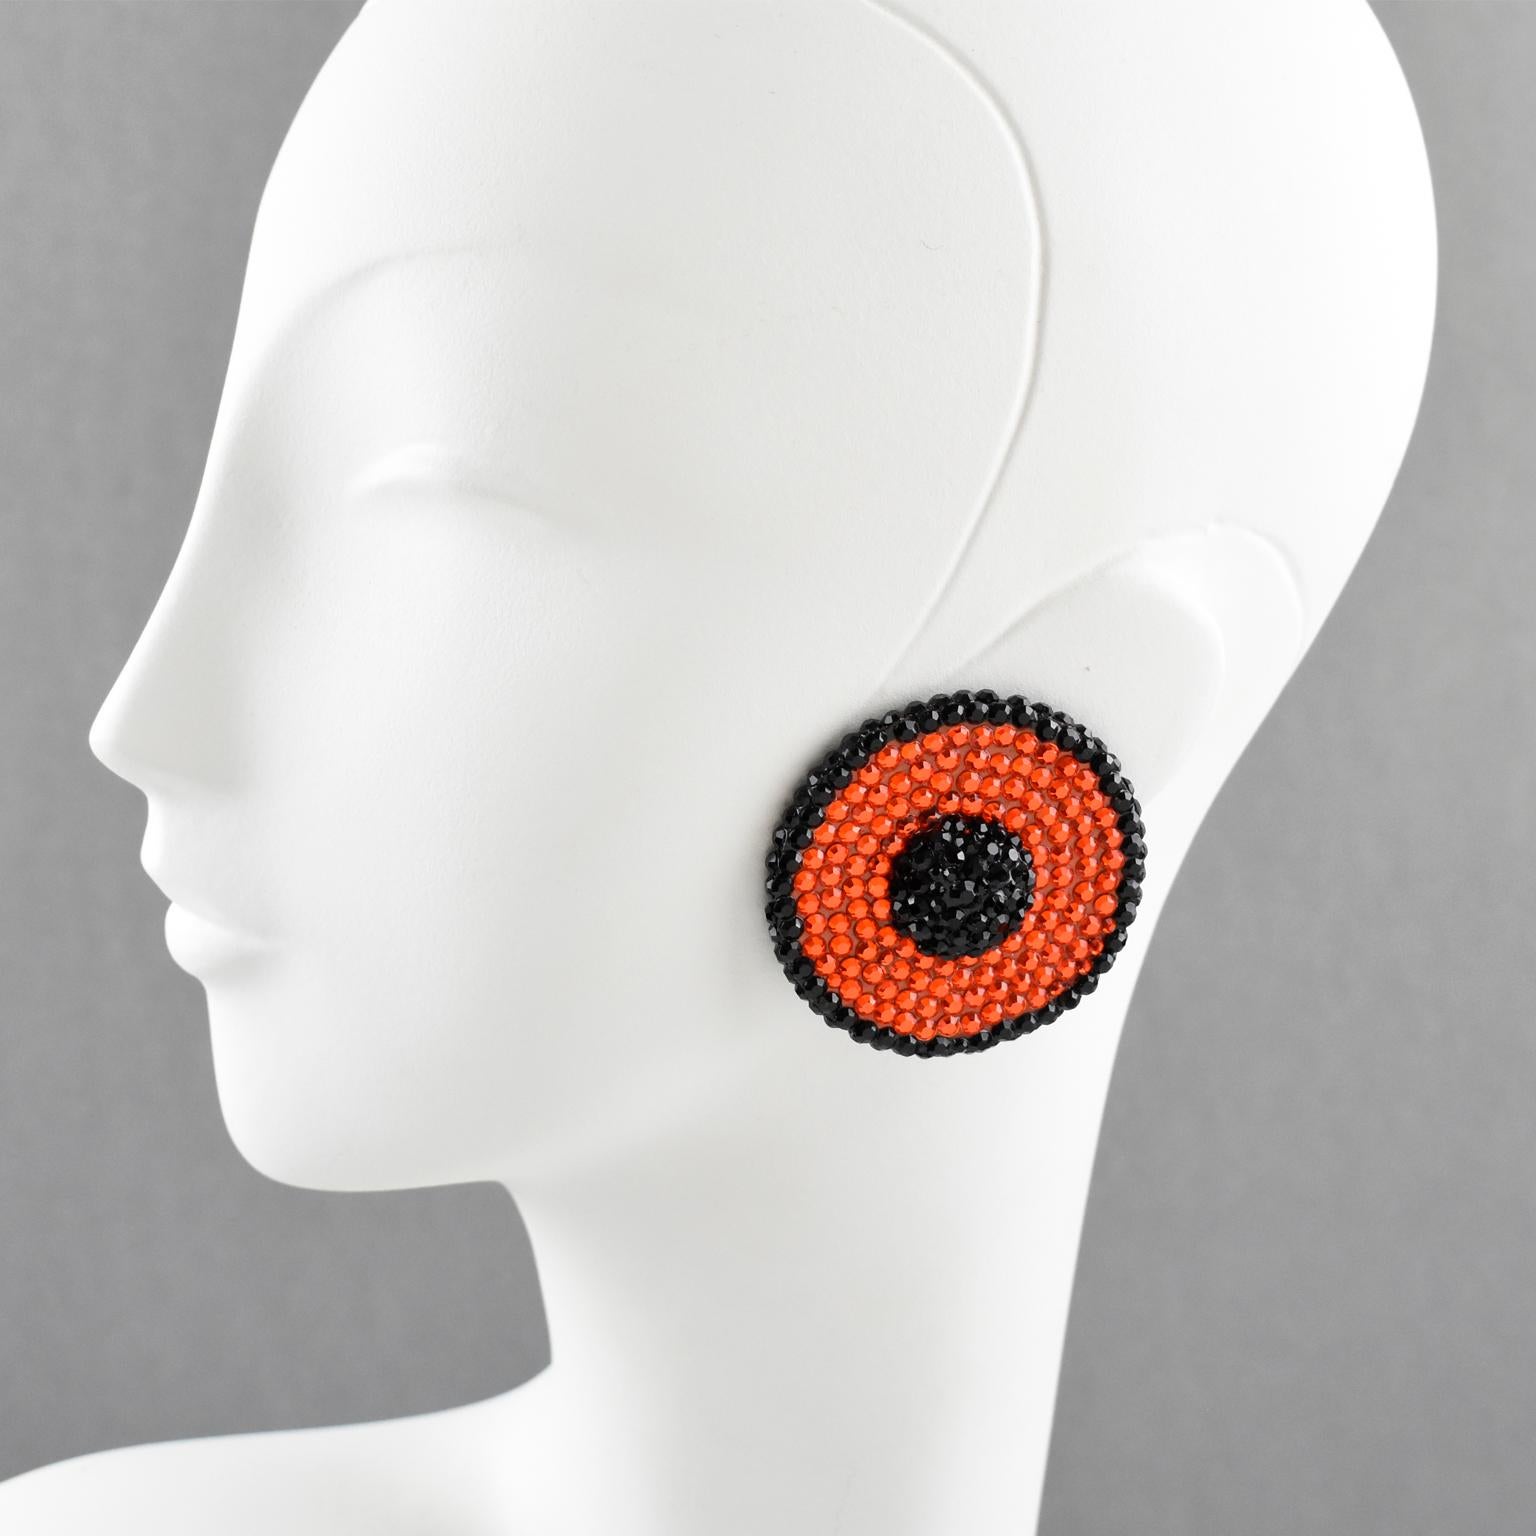 An impressive statement clip-on earrings designed by Richard Kerr in the 1980s. They are made up of his signature pave rhinestones. These pieces feature a large dimensional flat shape with a domed center, all covered with colorful crystal